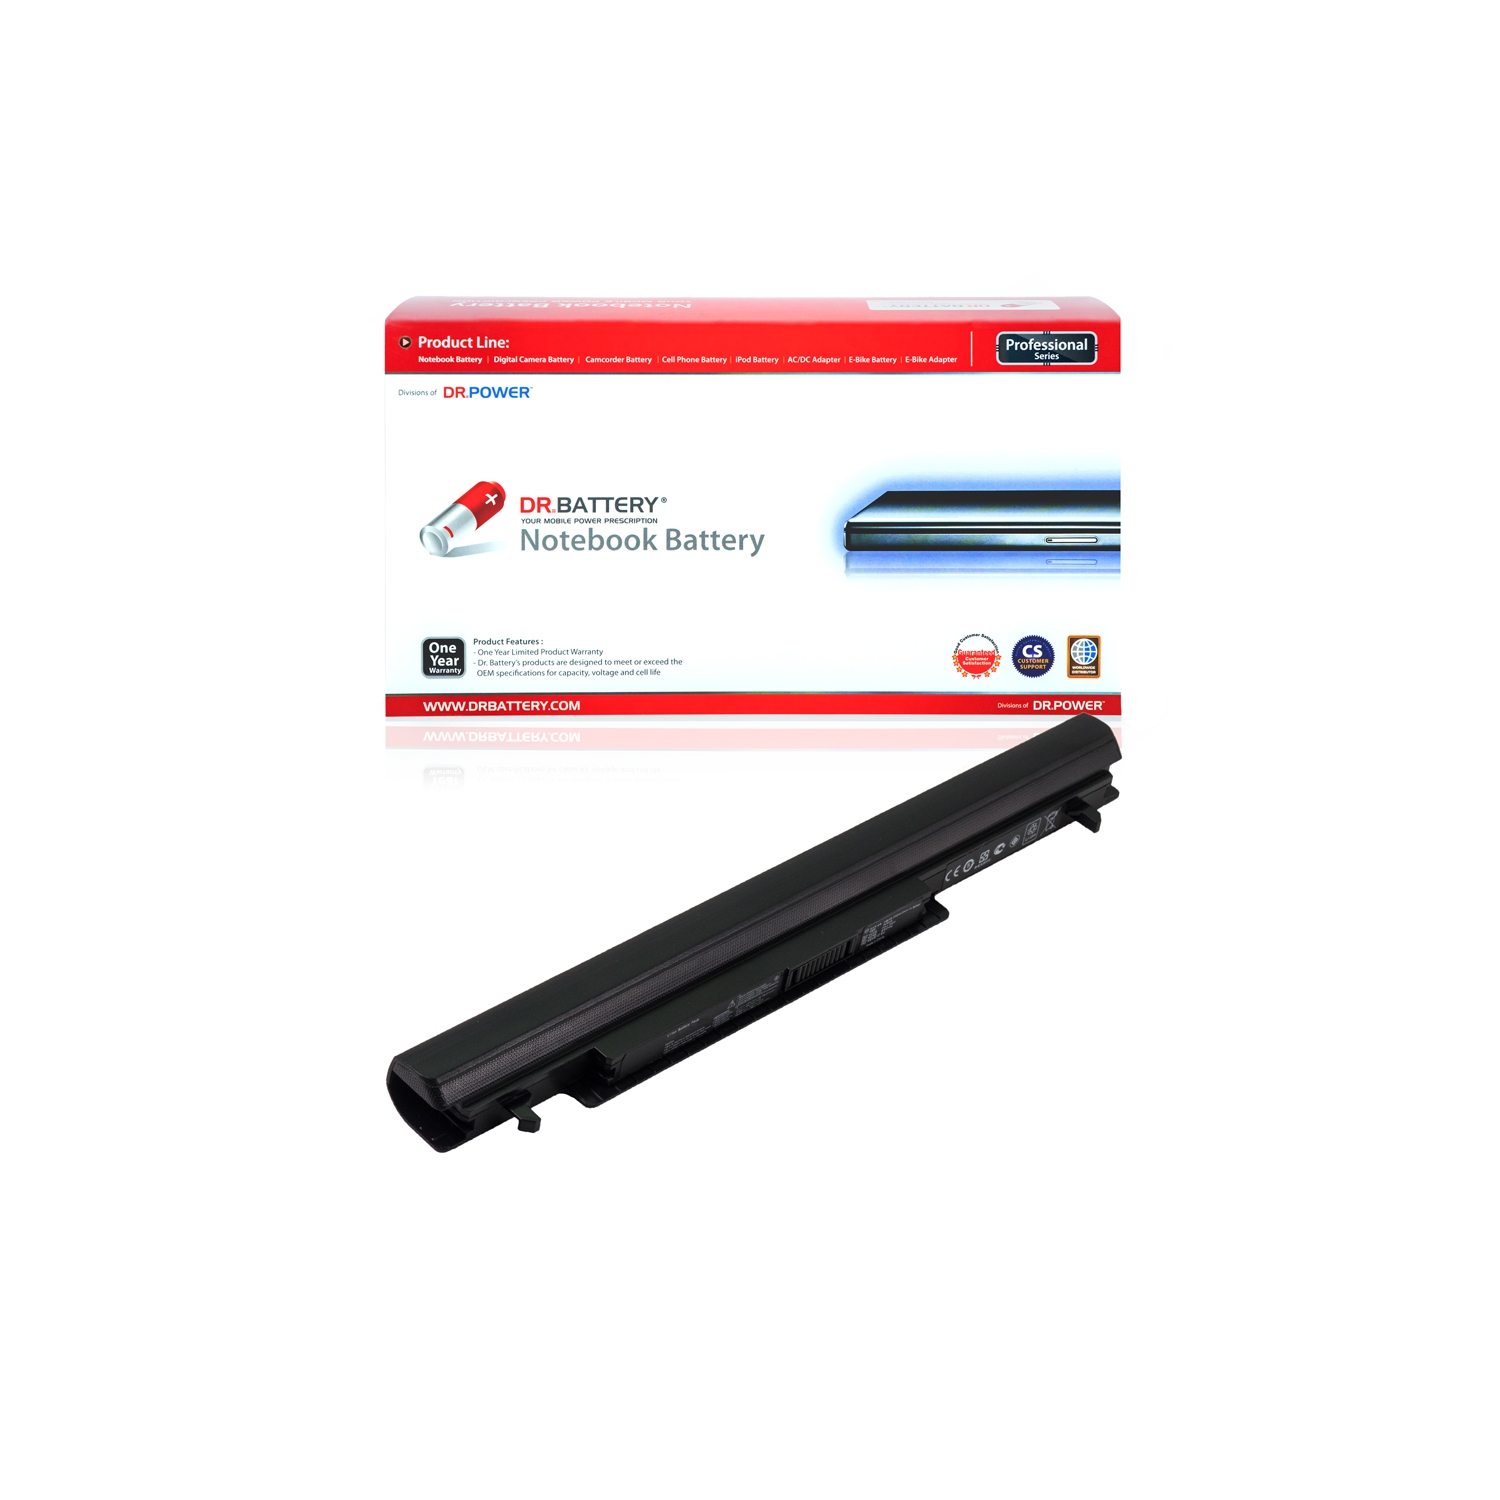 DR. BATTERY - Replacement for Asus K46 / K46C / K46CA / K46CB / K46CM / K46V / K56 / A31-K56 / A32-K56 / A41-K56 / A42-K56